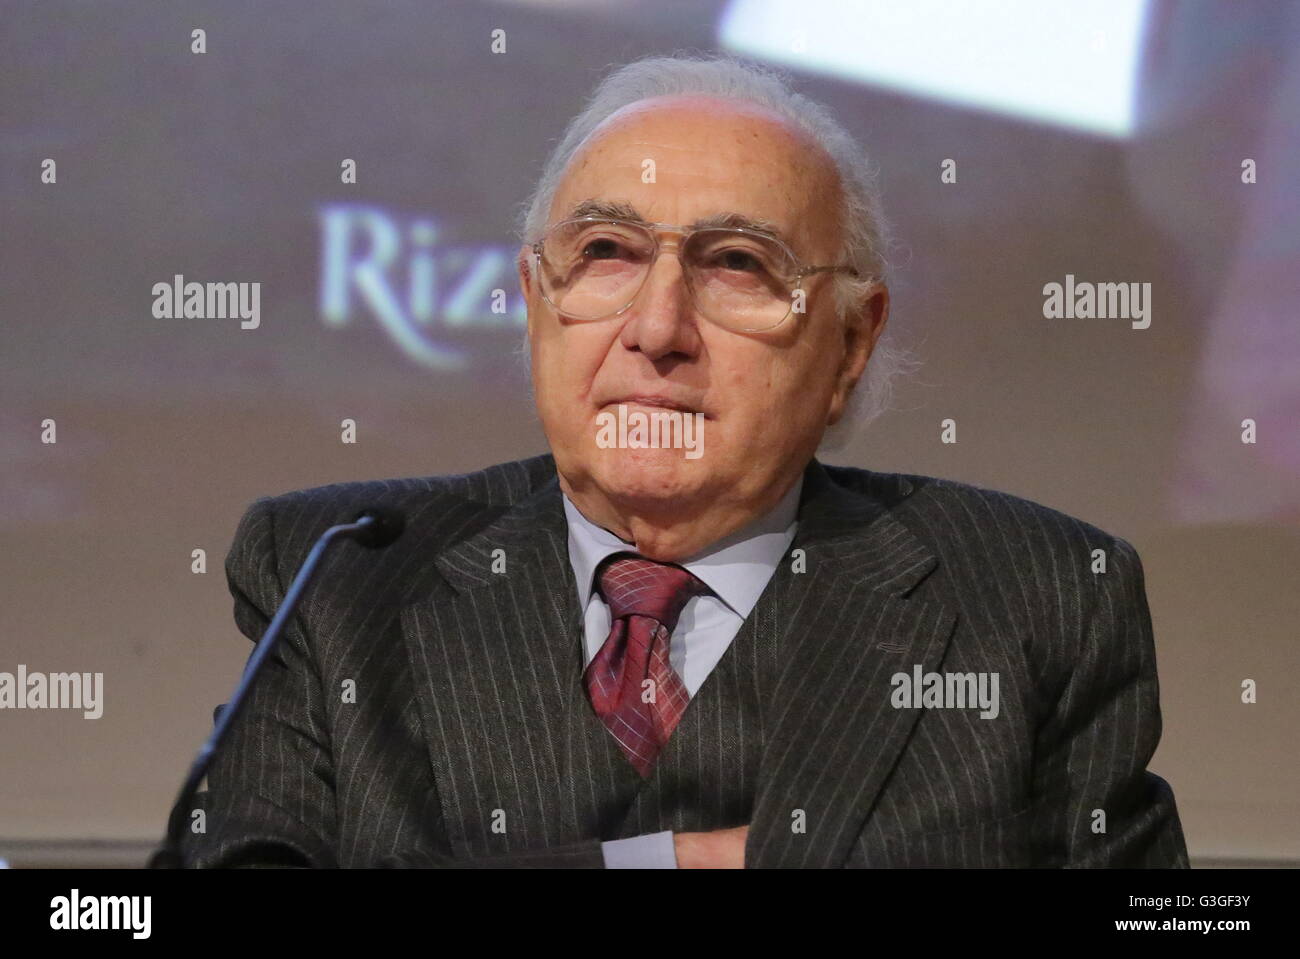 Turin, Italy. 14th May, 2016. The Italian television presenters Pippo Baudo during the presentation of the book by Walter Veltroni 'Ciao' at International Book Fair. © Massimiliano Ferraro/Pacific Press/Alamy Live News Stock Photo